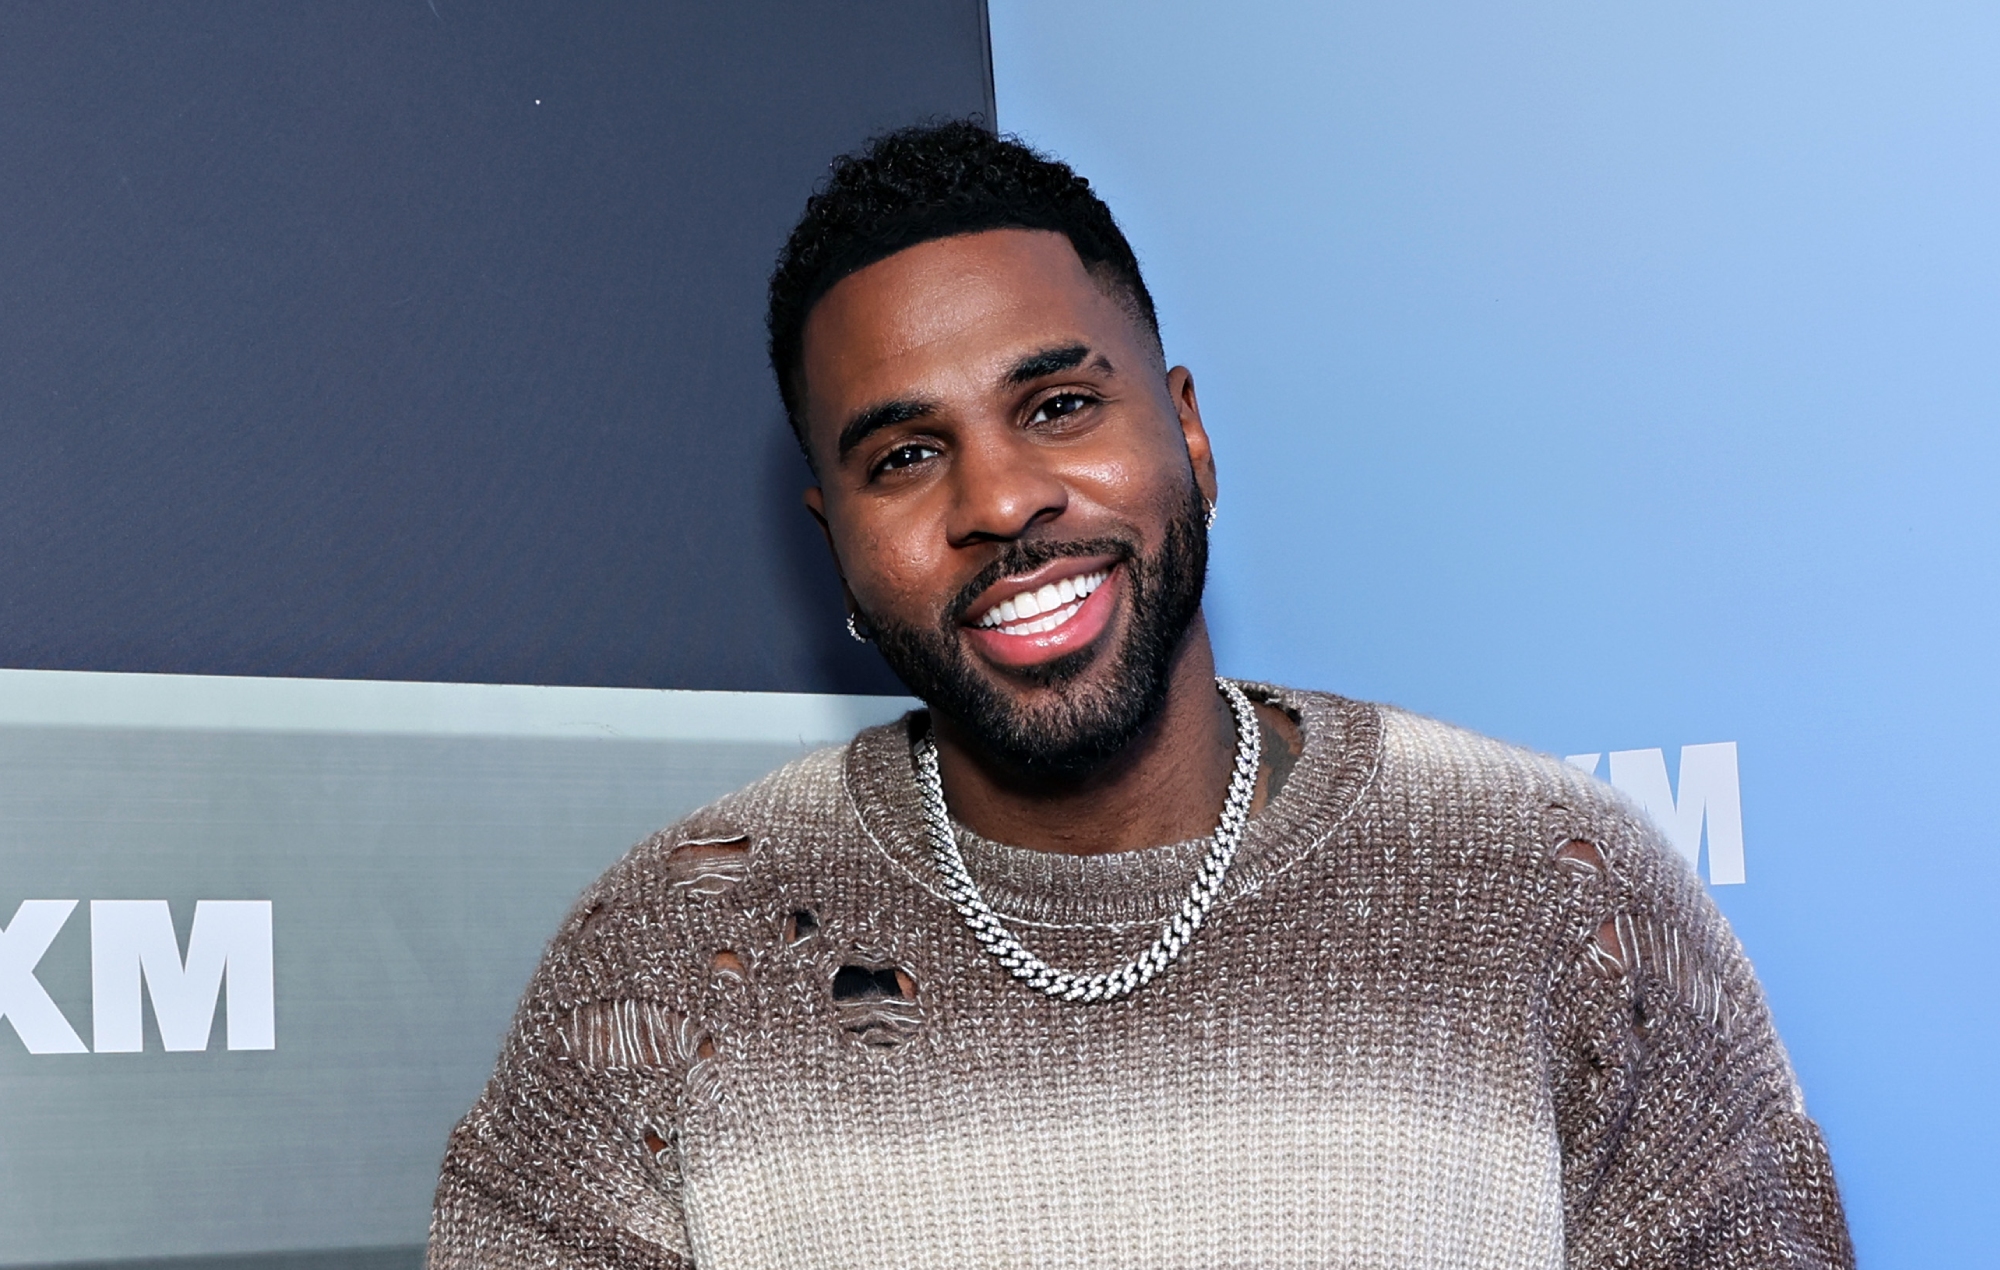 Jason Derulo receives gifts from PETA after pulling out of SeaWorld performance